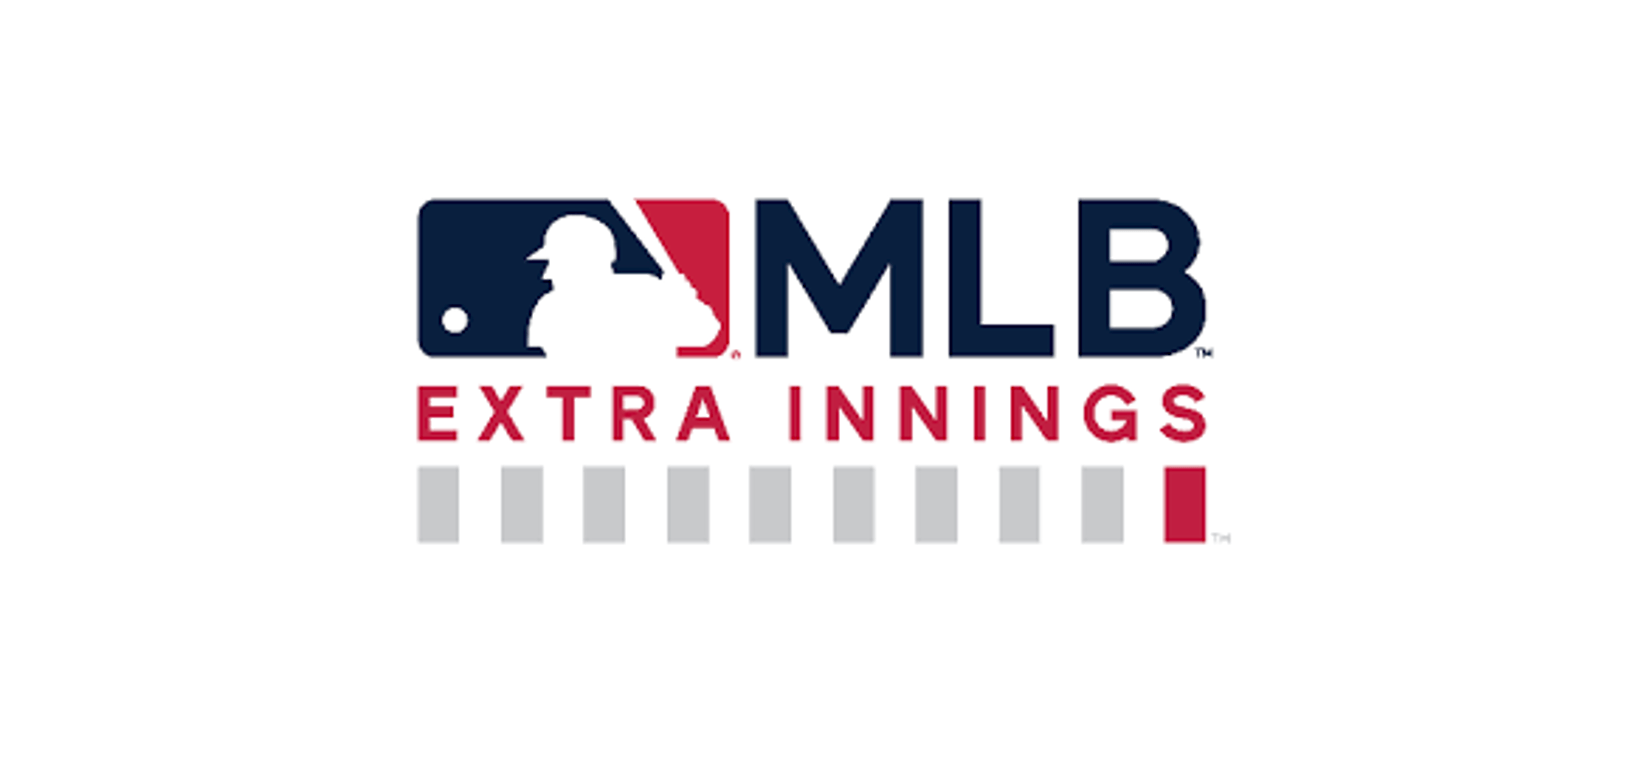 MLB Extra Innings Gets a $10 Price Hike on DIRECTV